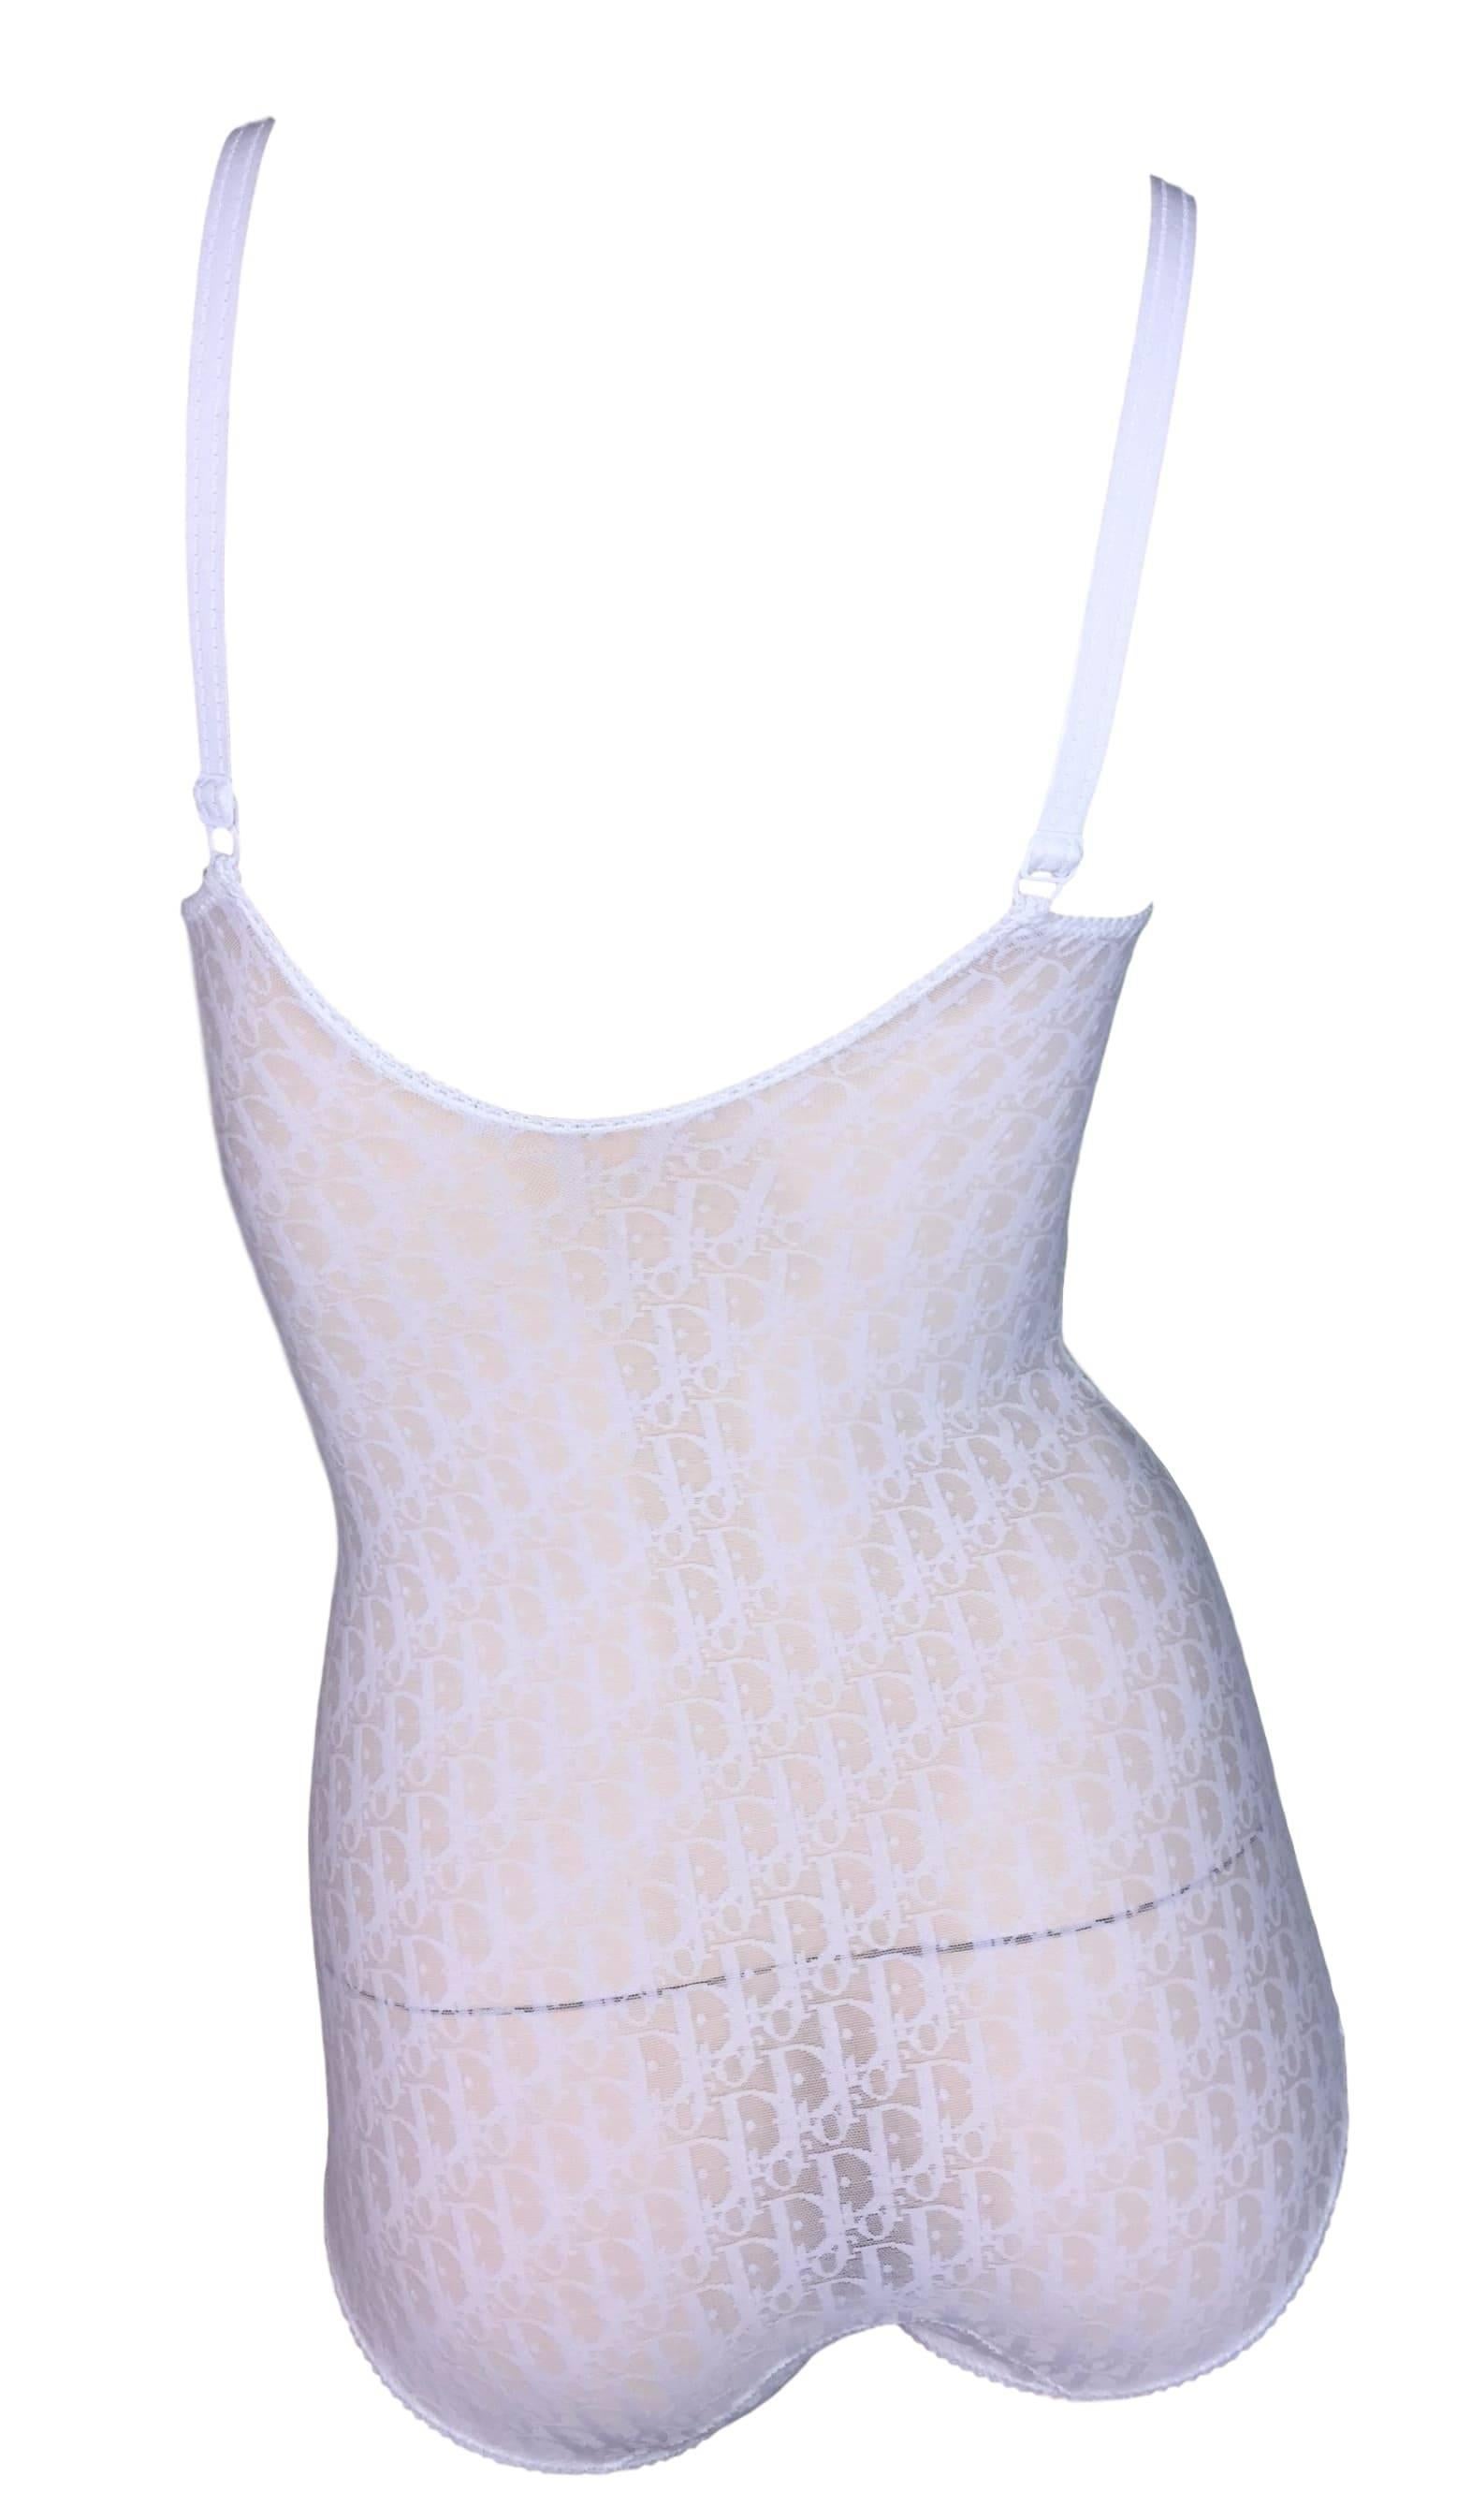 DESIGNER: 1990's Christian Dior

Please contact for more information and/or photos.

CONDITION: Excellent- the inner chest piece between the cups is slightly darker. Very minor and its inside. Please see photo. 

MATERIAL: Nylon/Spandex

COUNTRY